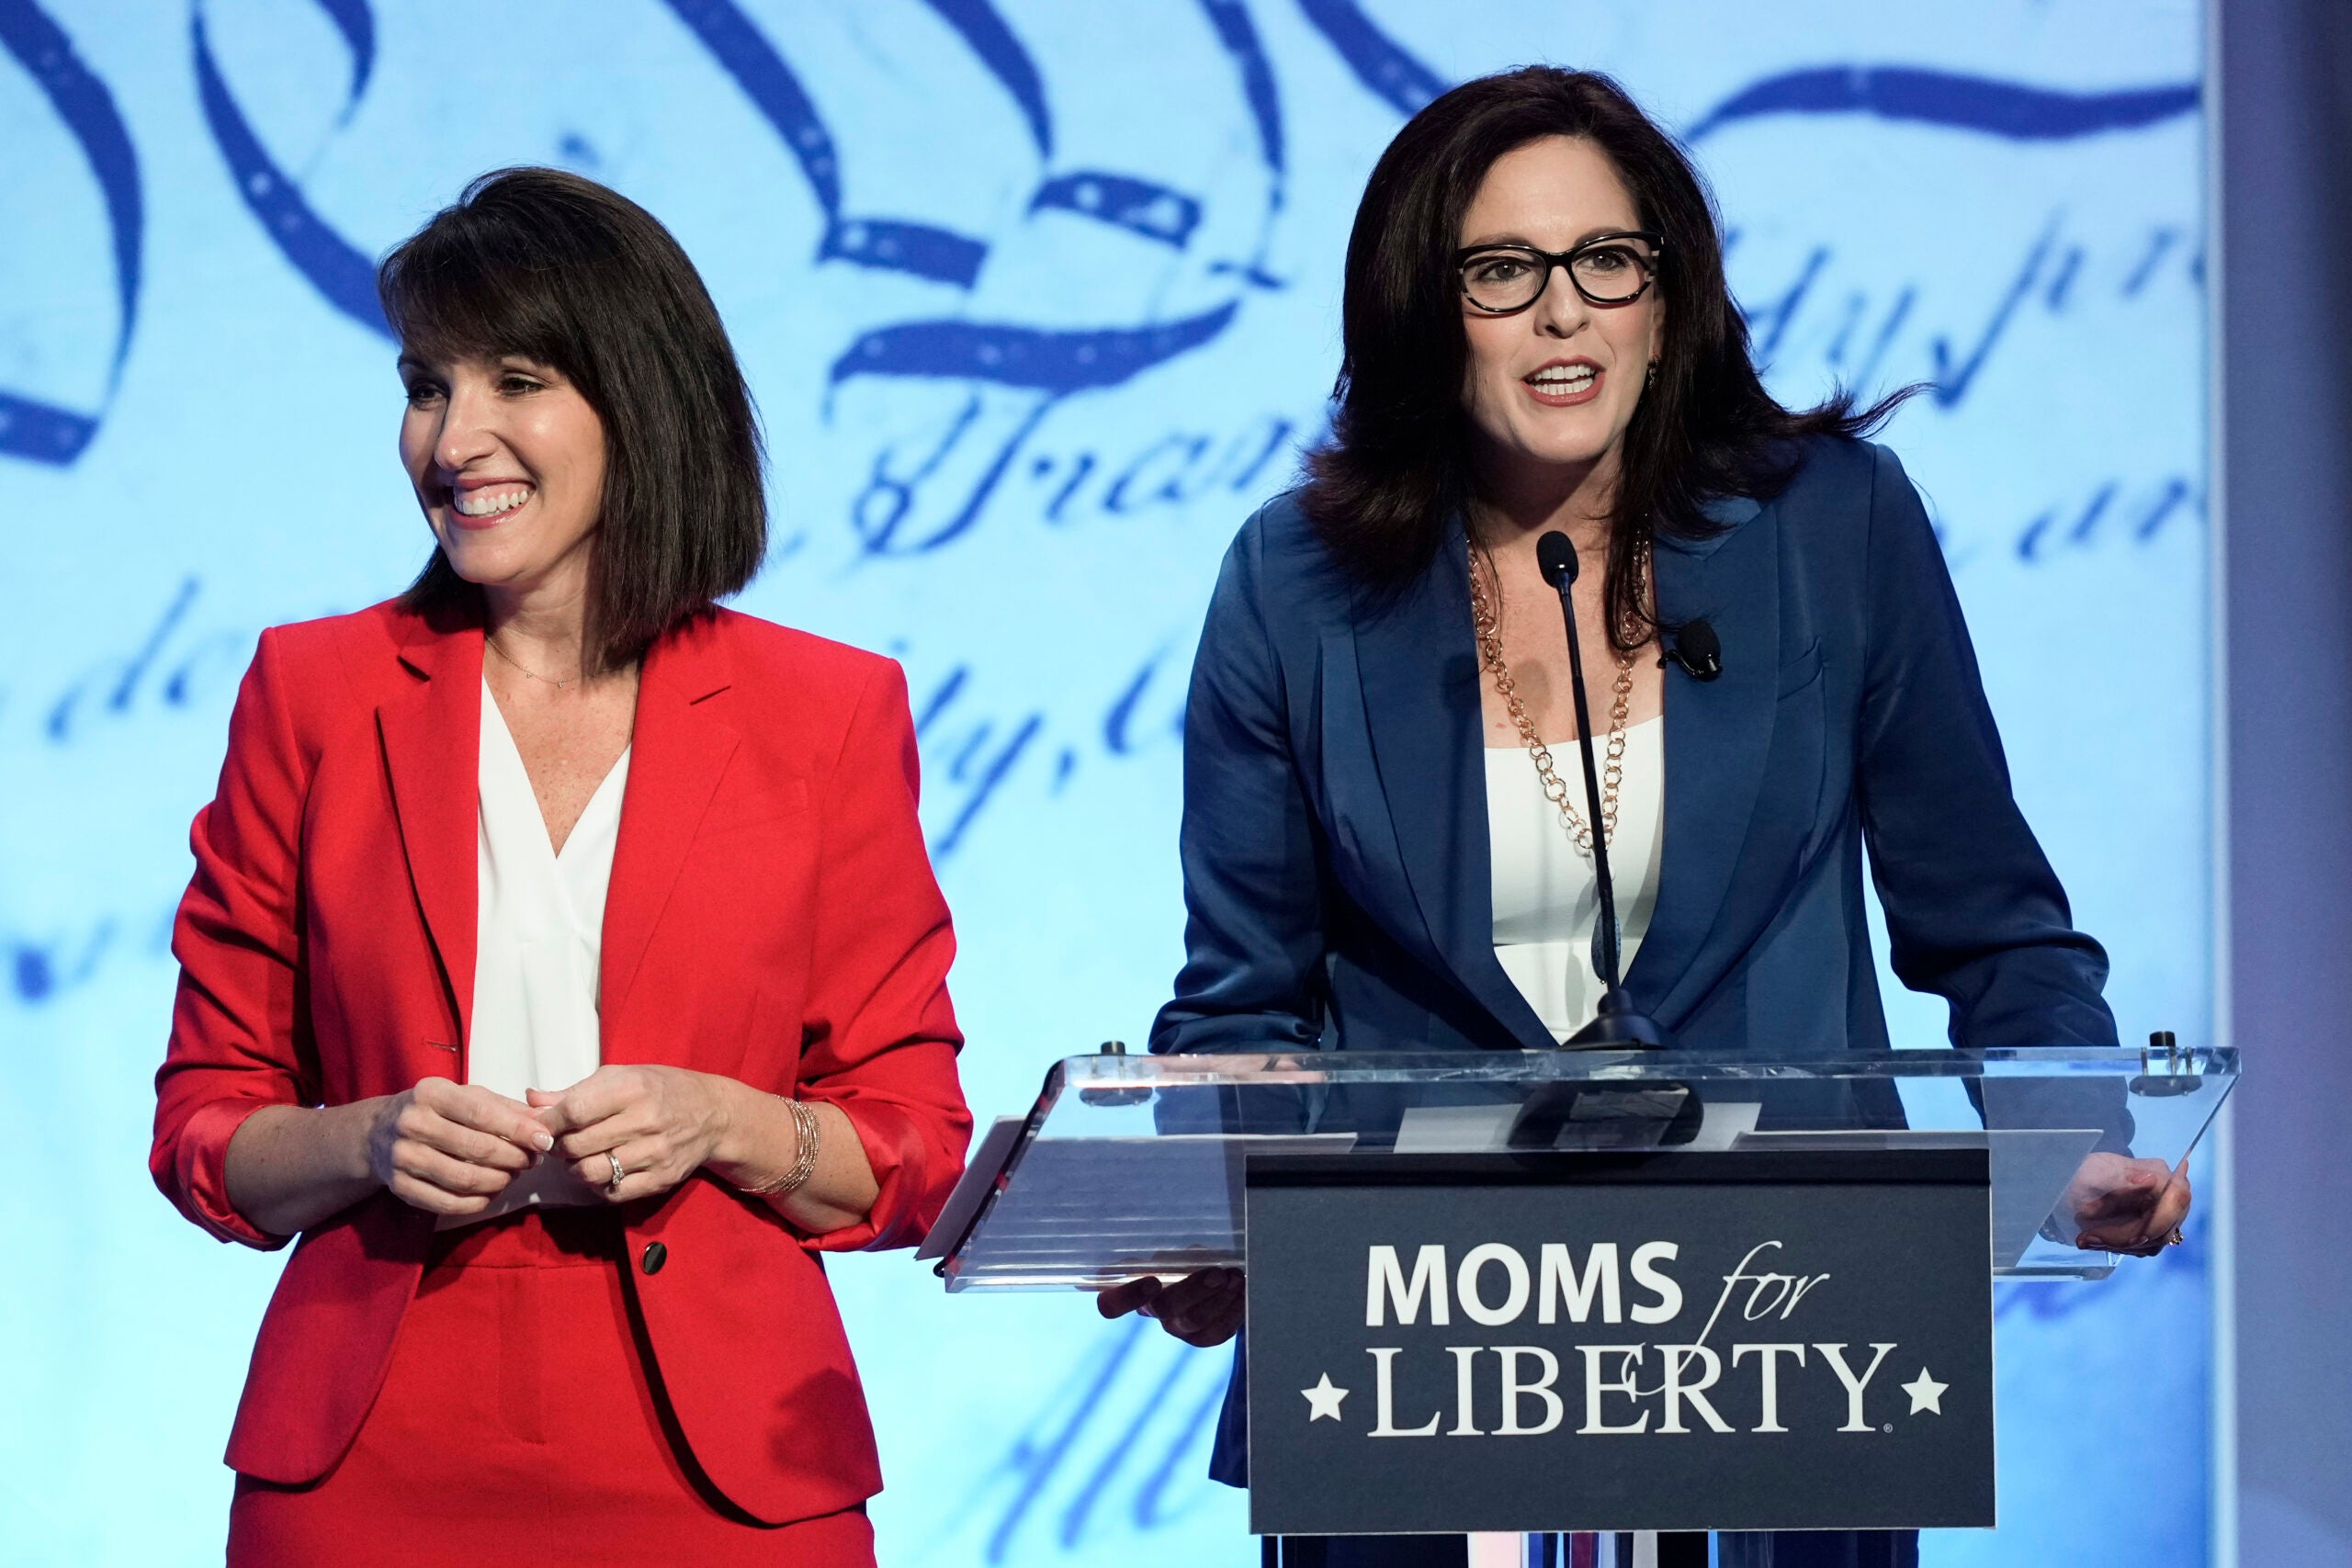 Moms for Liberty co-founders Tina Descovich, left, and Tiffany Justice, speak at the Moms for Liberty meeting in Philadelphia.